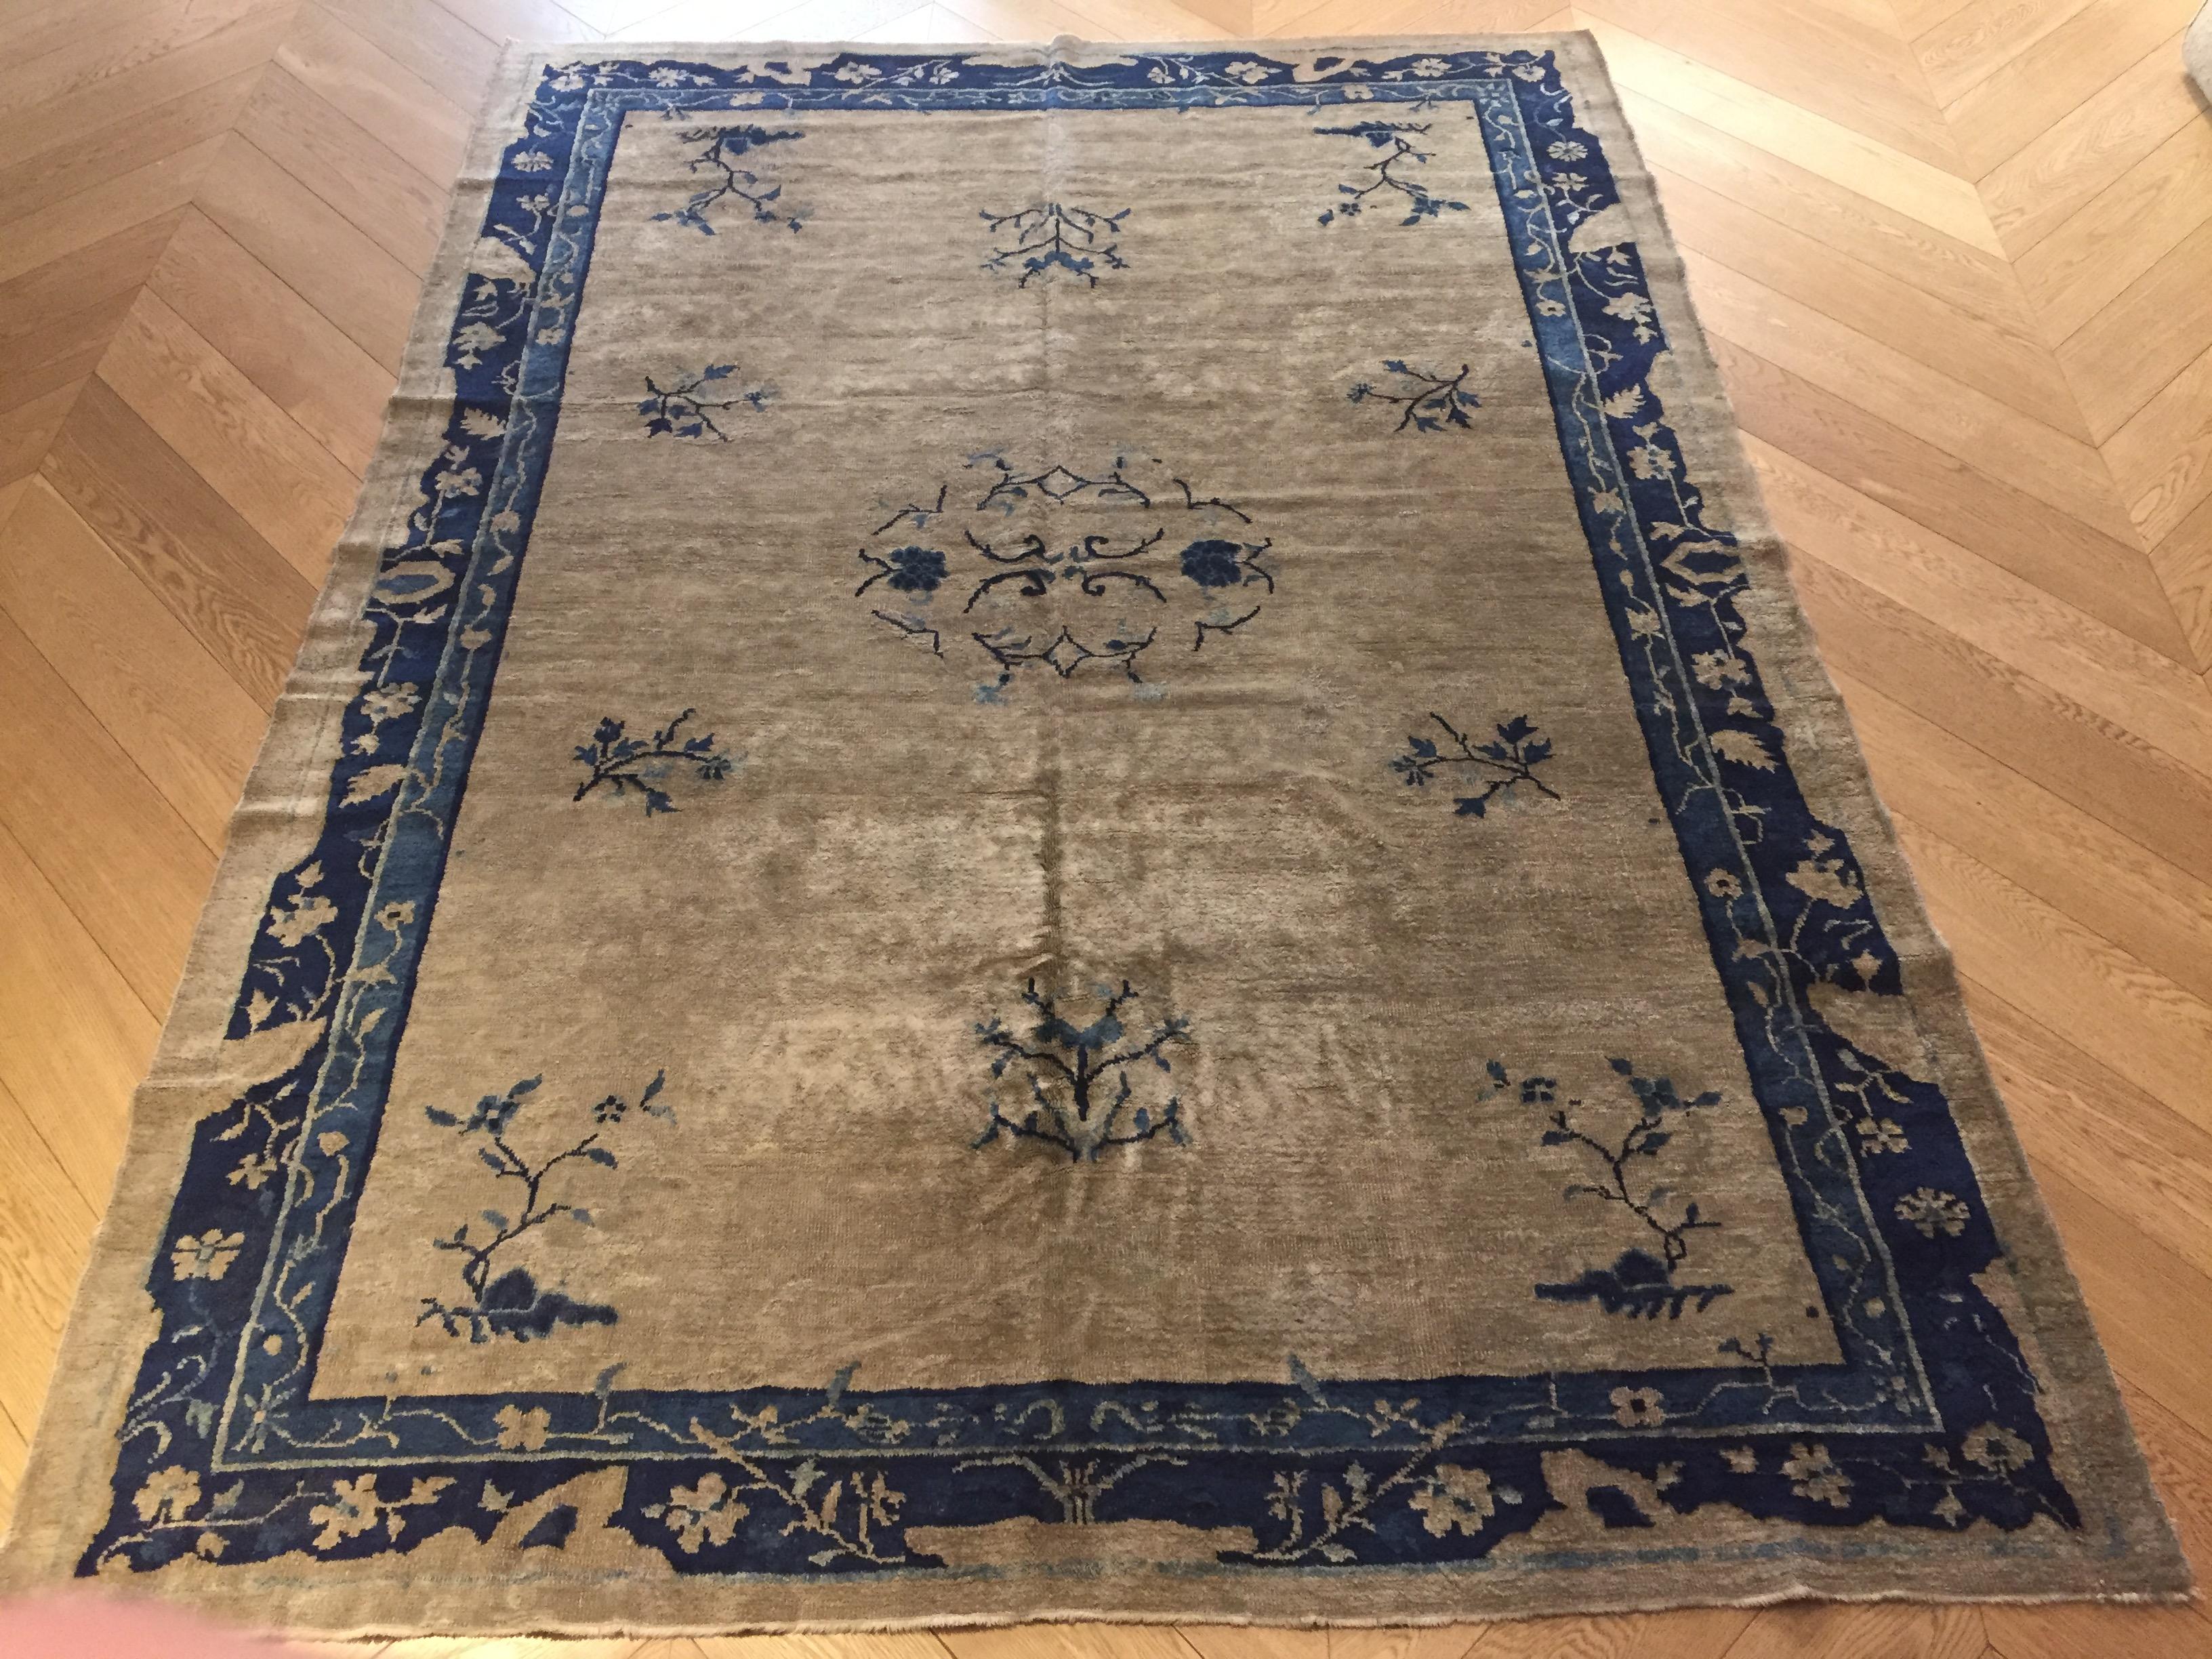 These rugs are characterized by the elegance of the tones and the refinement of the design that is linked to the art of decoration of the blue white porcelain of the Ming period.

In our example the wool is particularly soft and silky, selected in